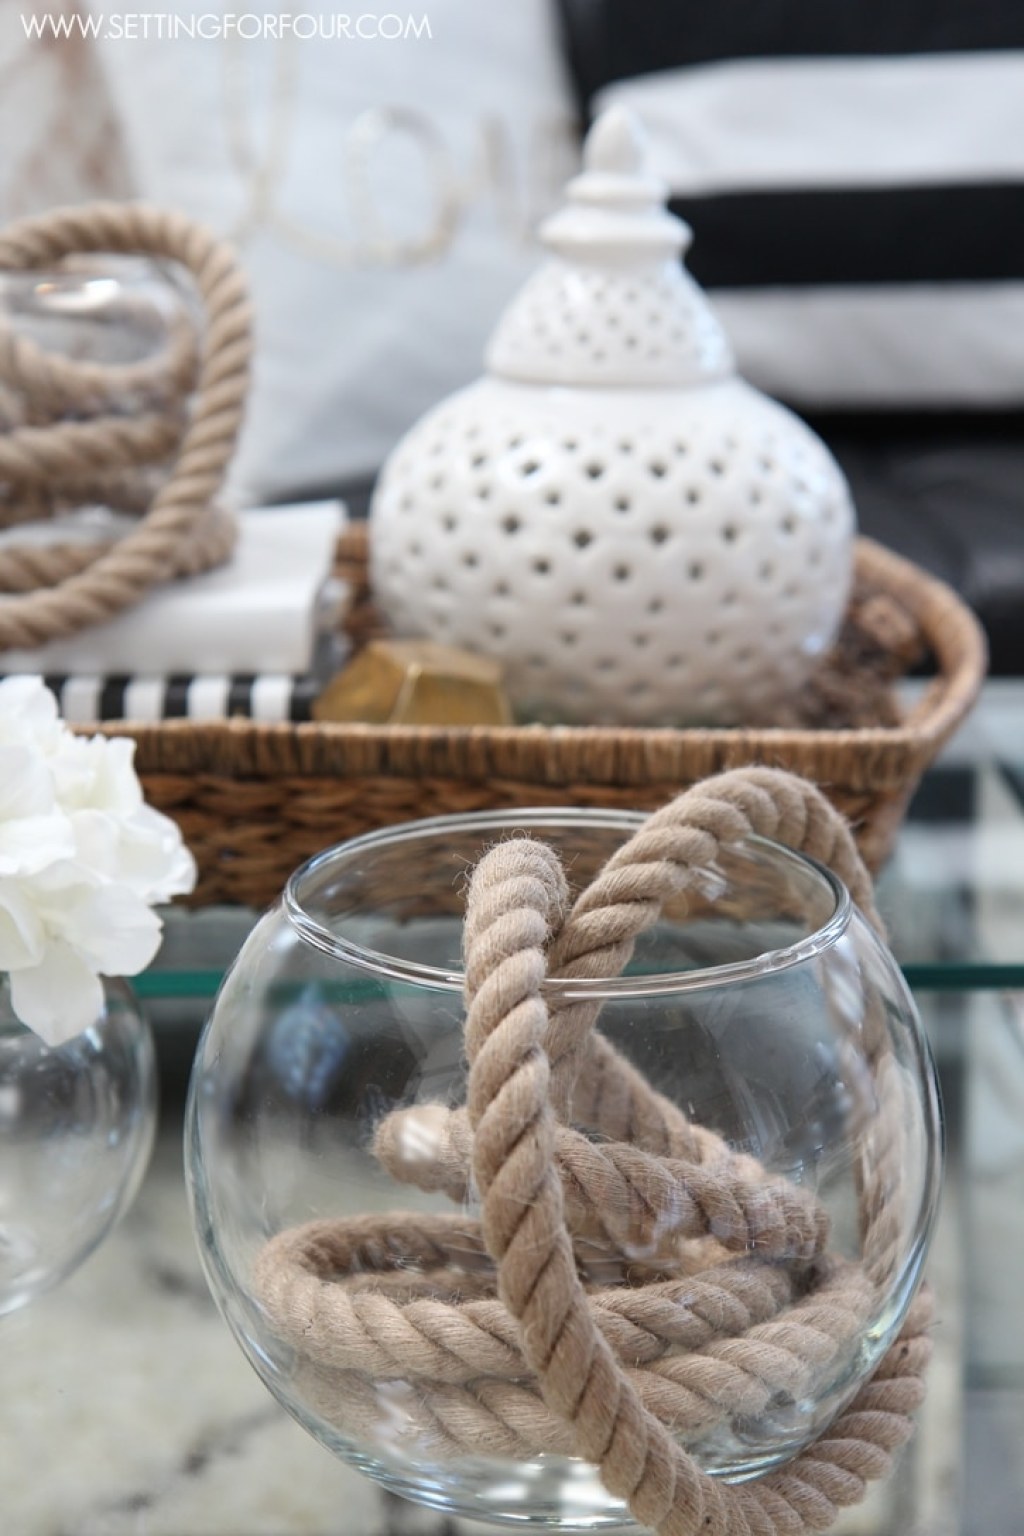 creative rope decorations - DIY Rope Decor - Setting for Four